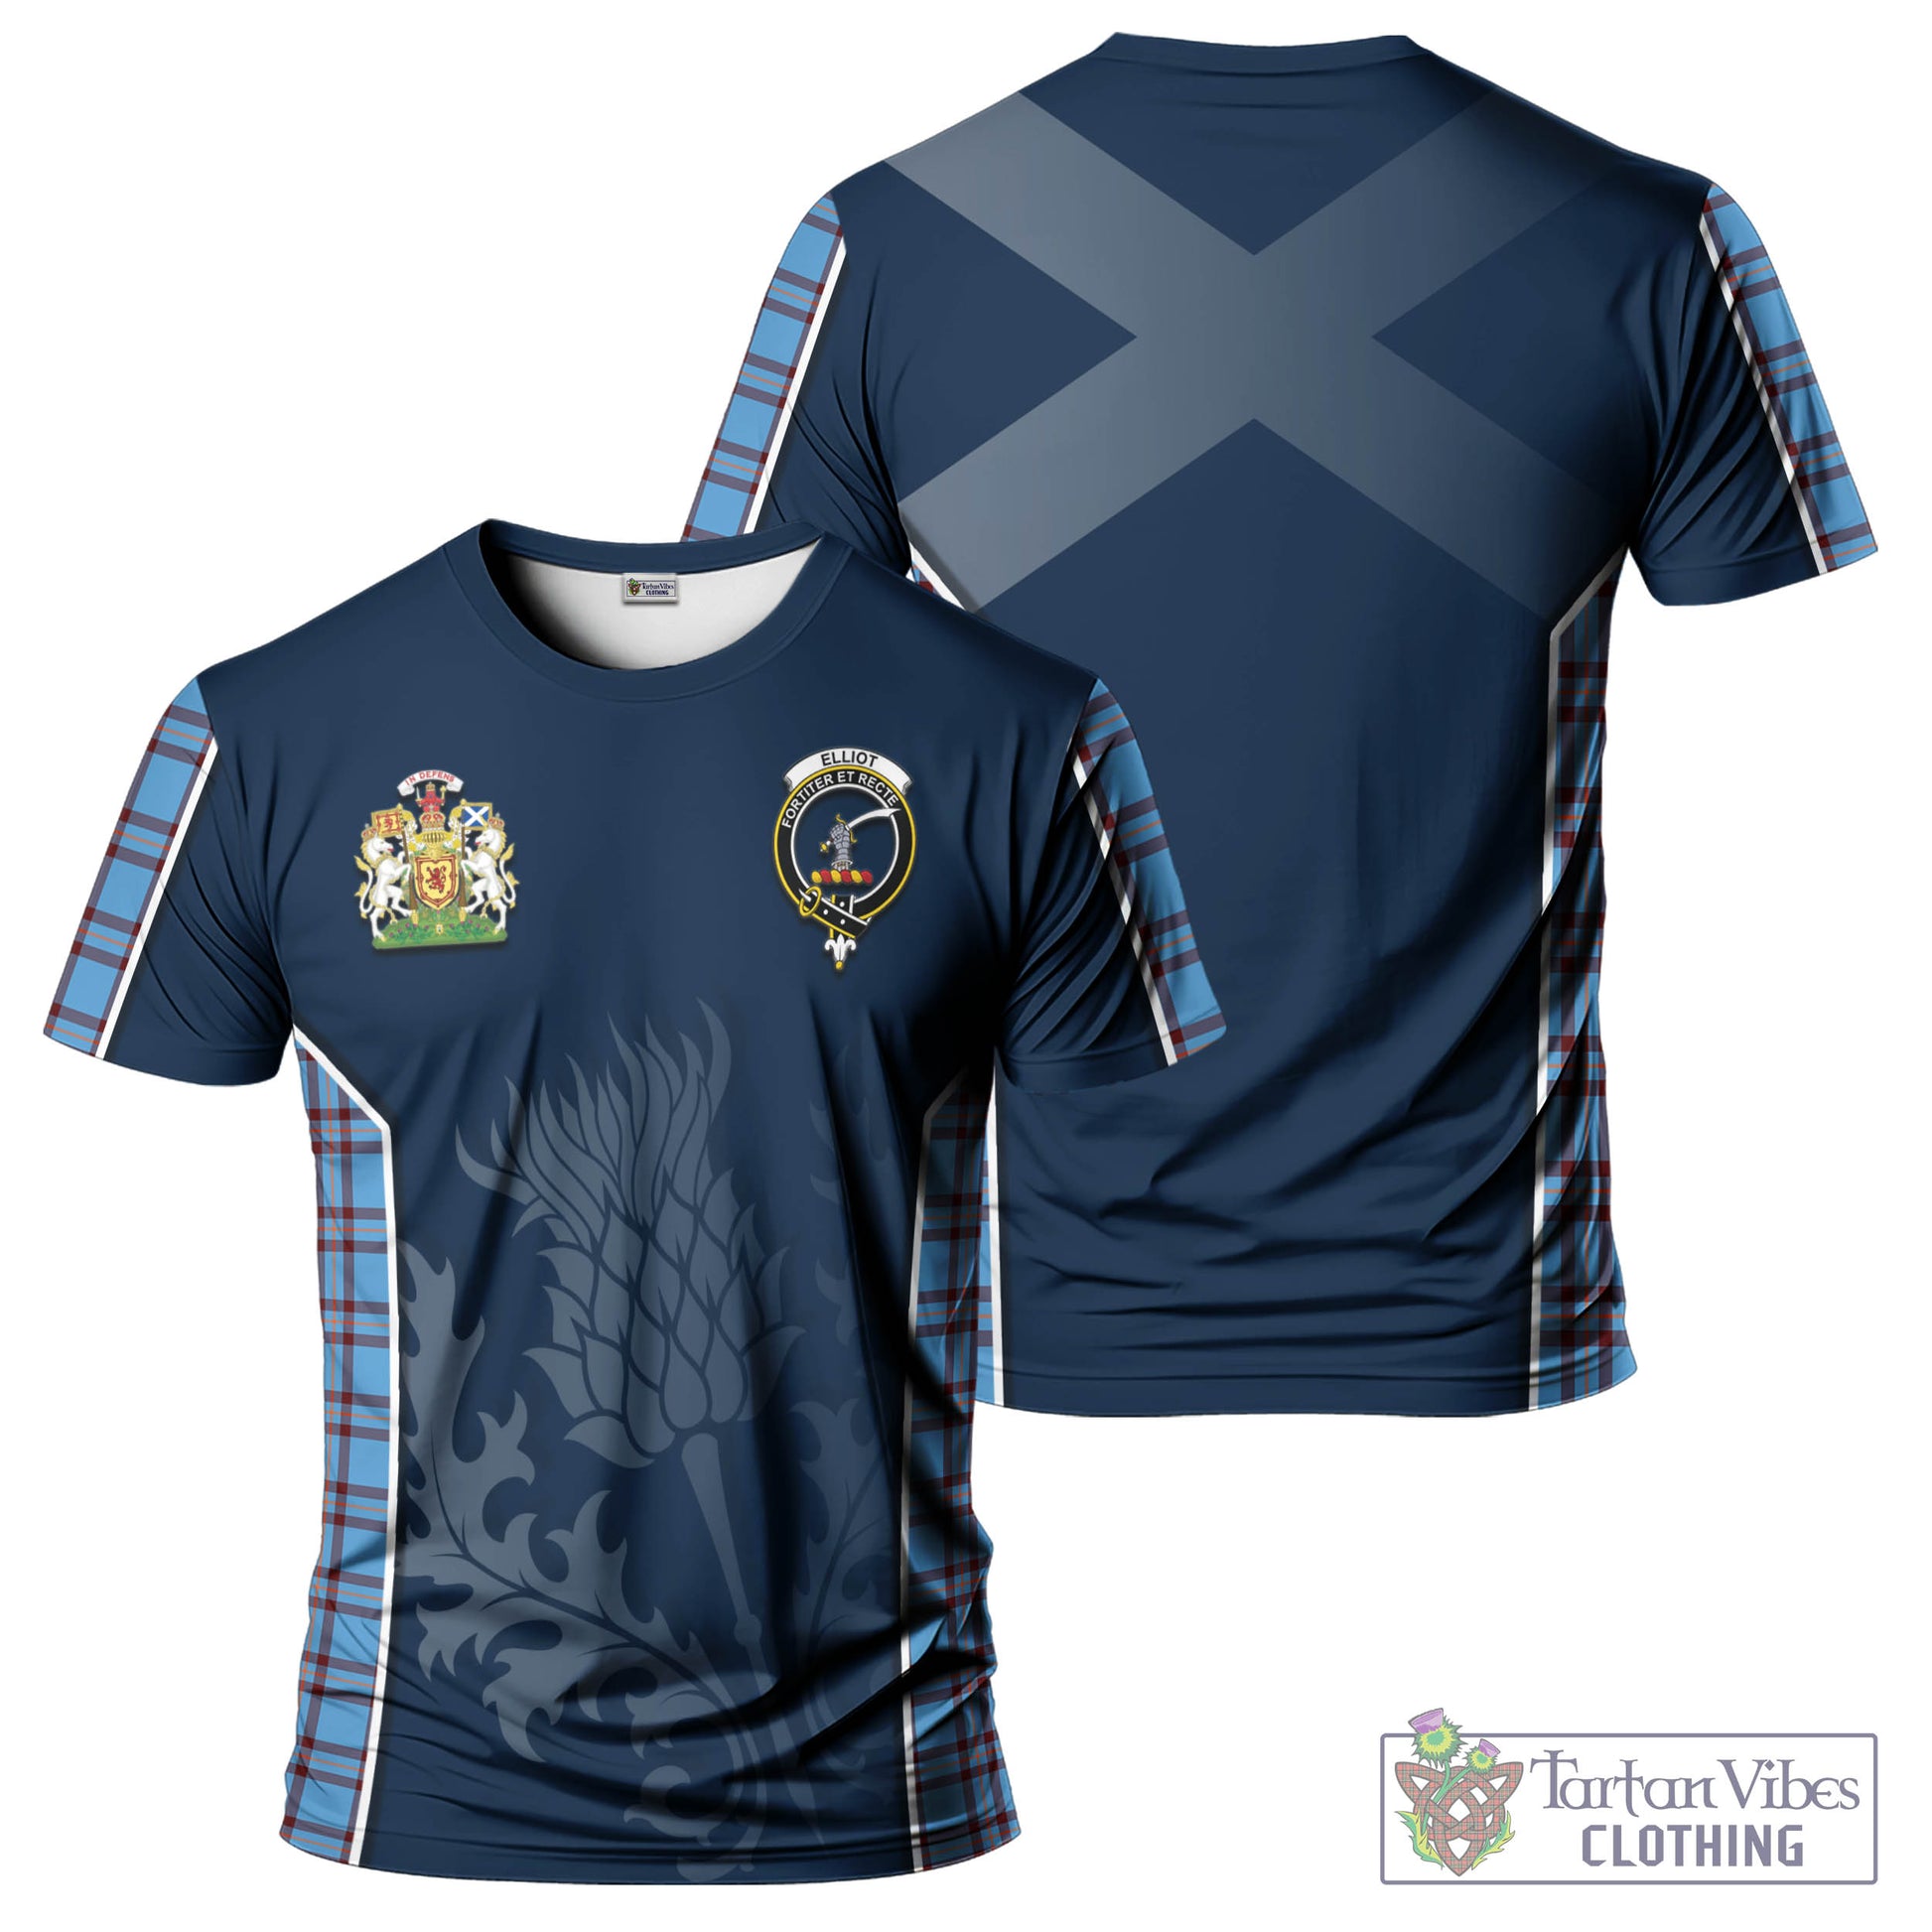 Tartan Vibes Clothing Elliot Ancient Tartan T-Shirt with Family Crest and Scottish Thistle Vibes Sport Style